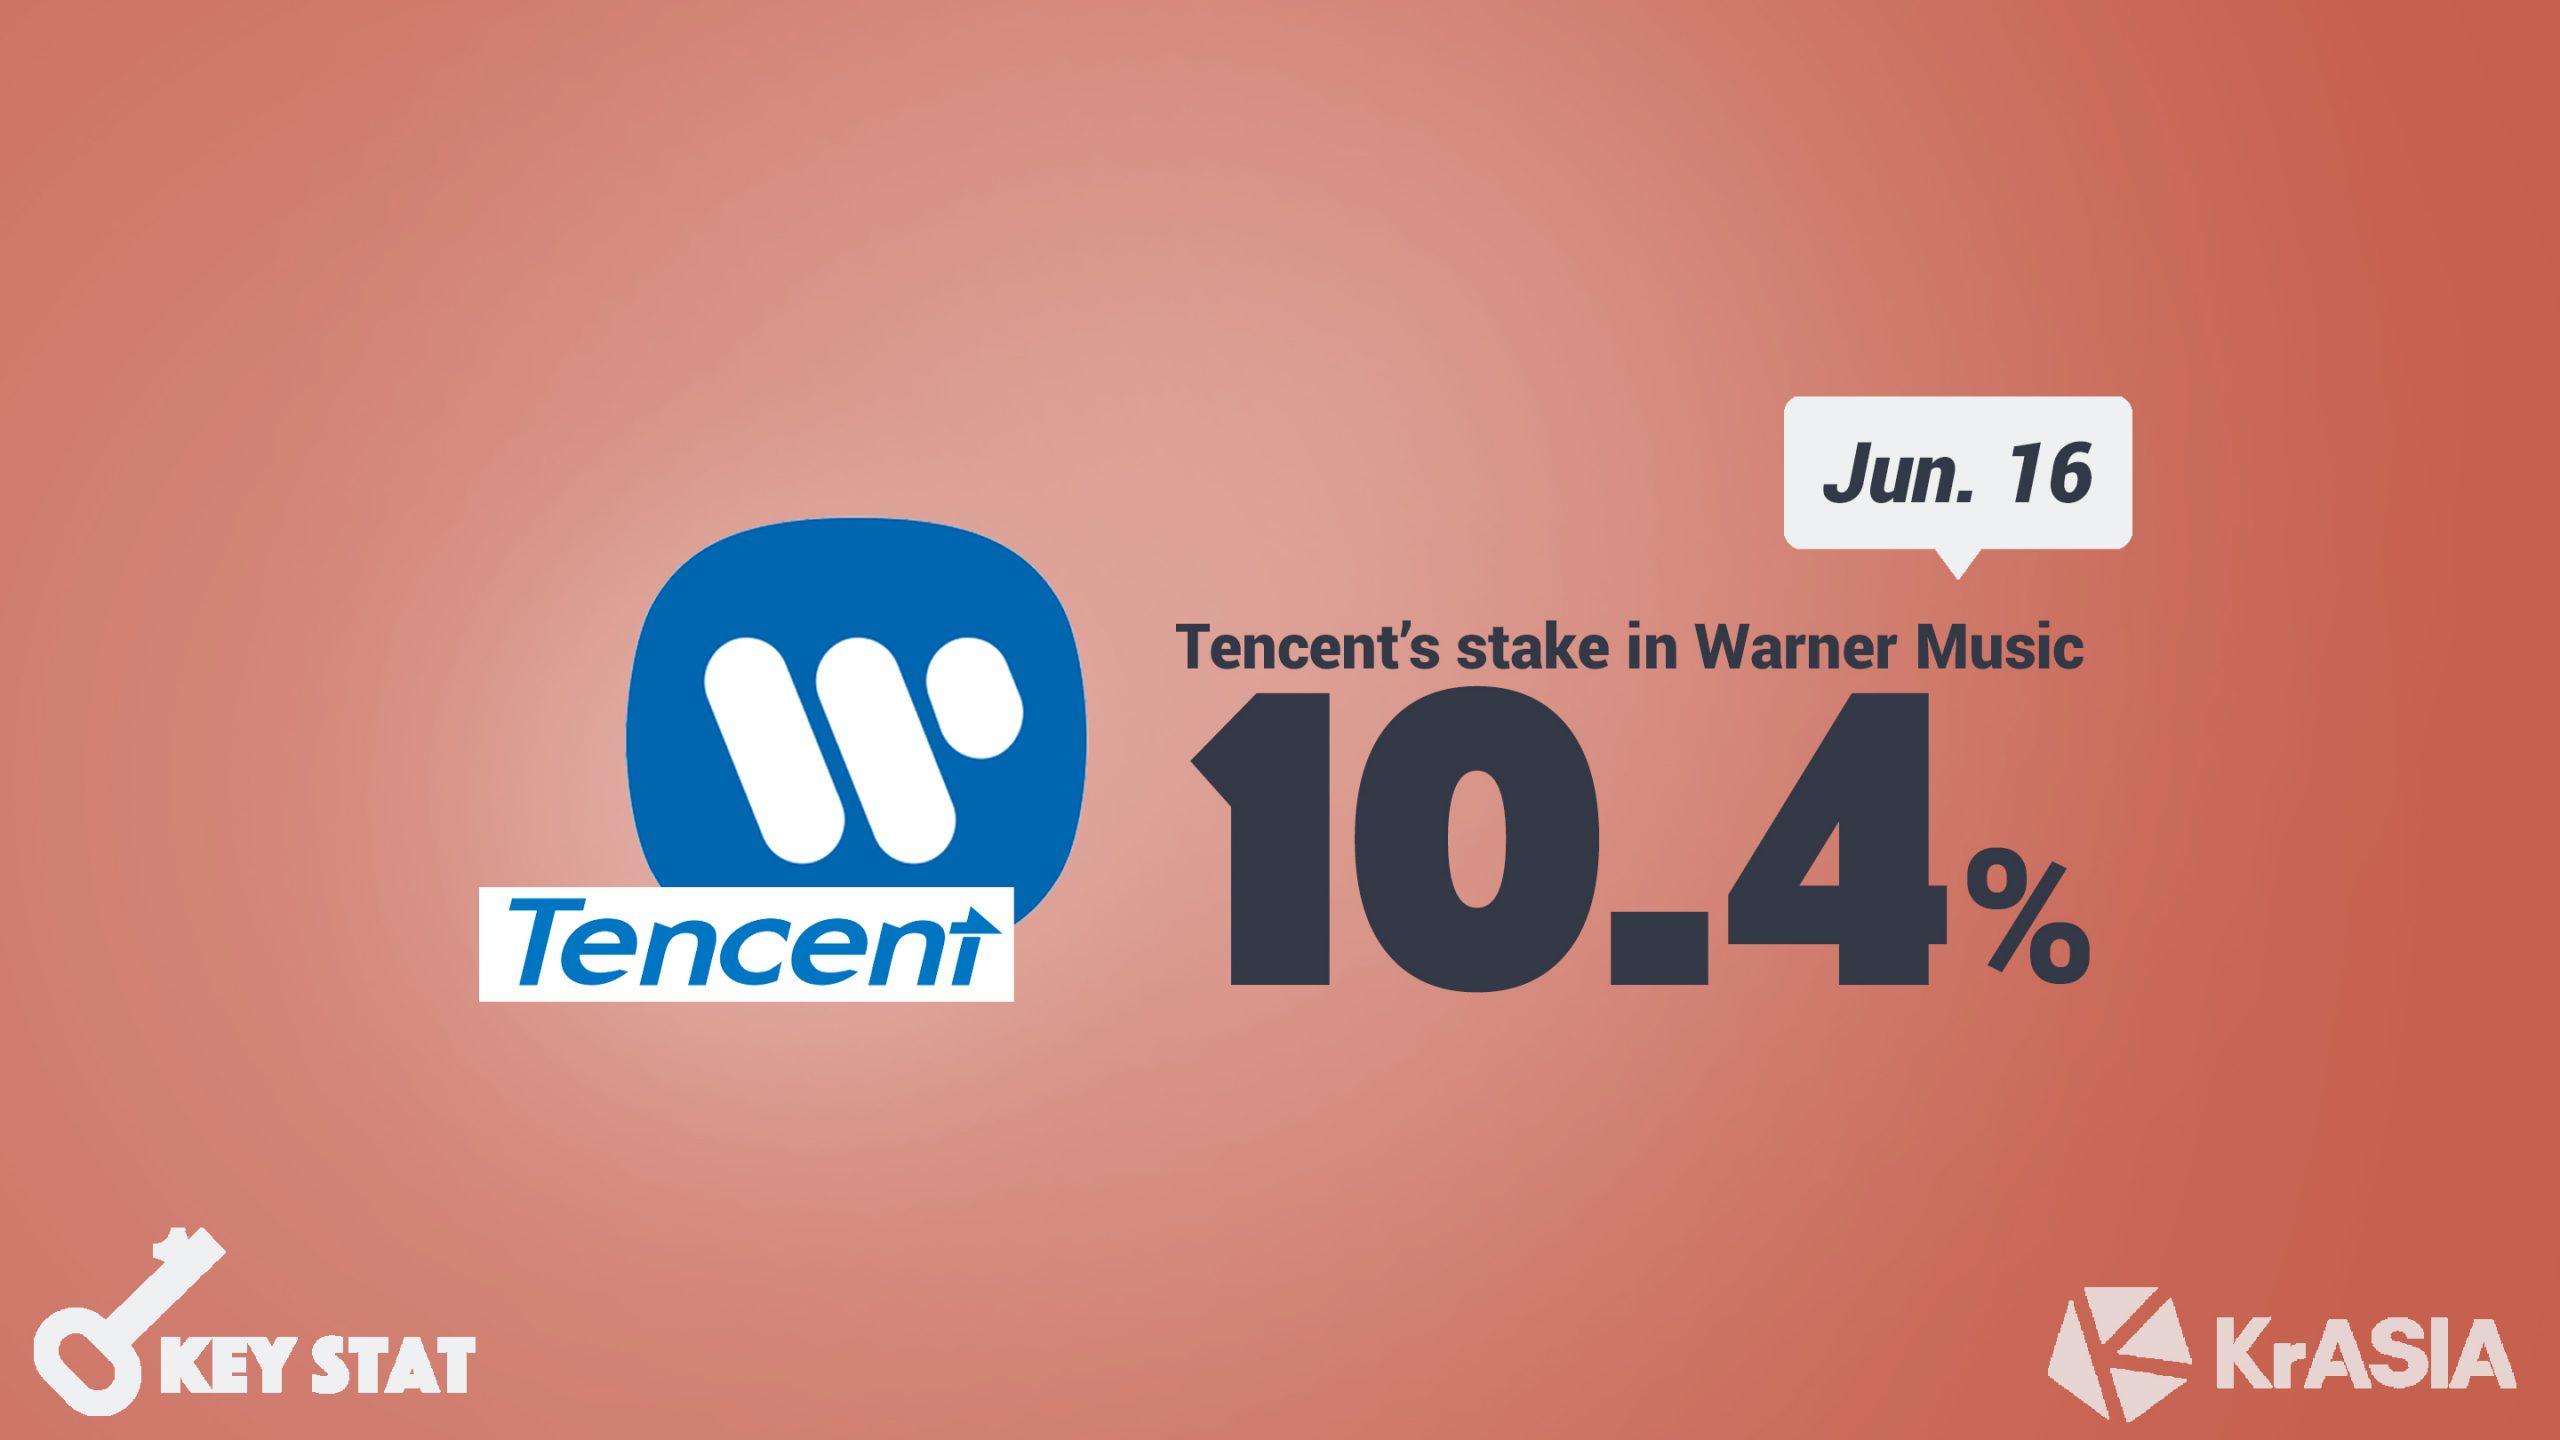 KEY STAT | Tencent acquires 10% stake in newly listed Warner Music Group